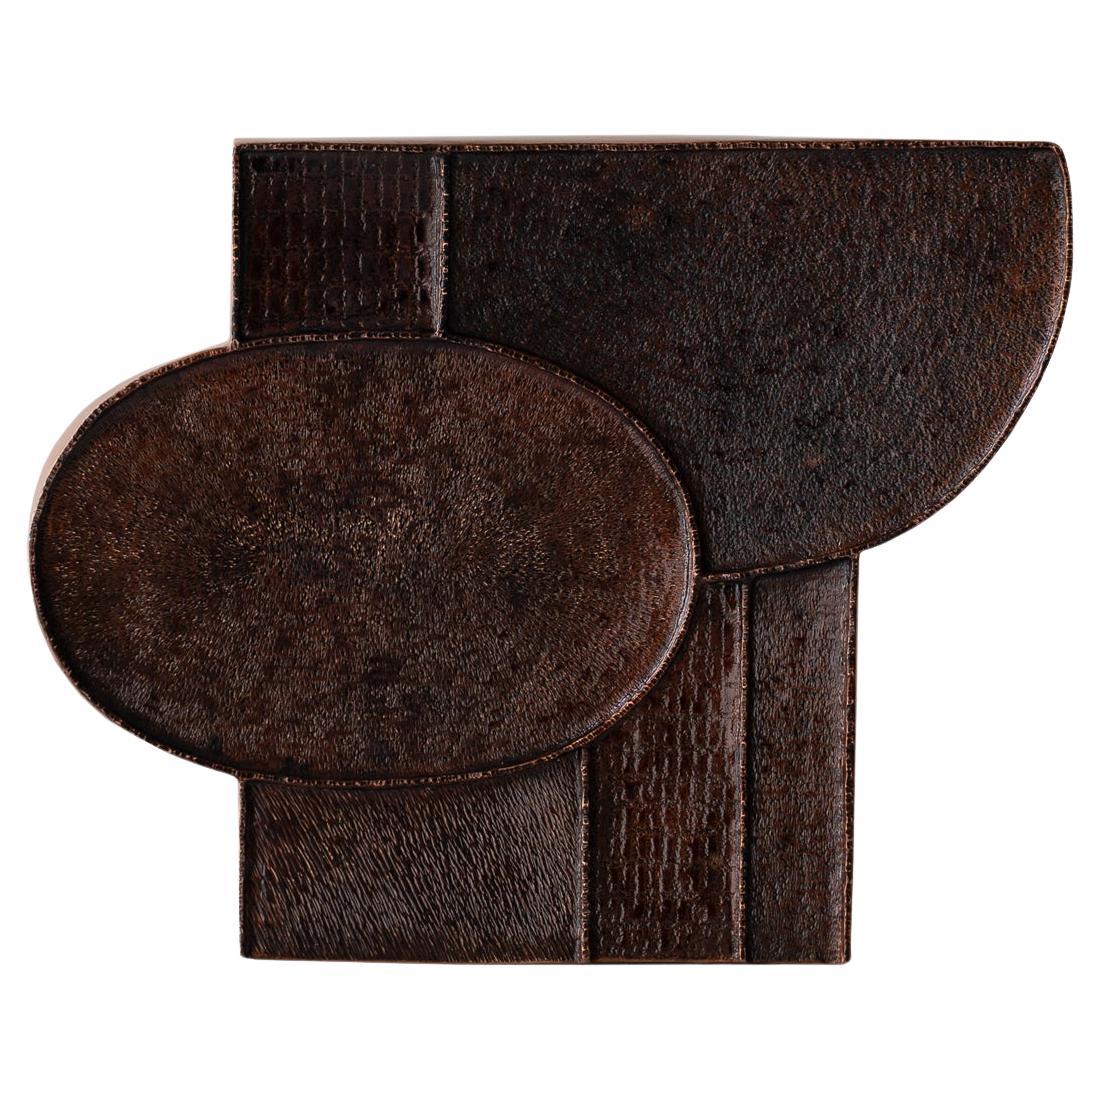 Contemporary Wall Object 1, Textured Natural Dark Lacquer, Seung Hyun Lee, Korea For Sale